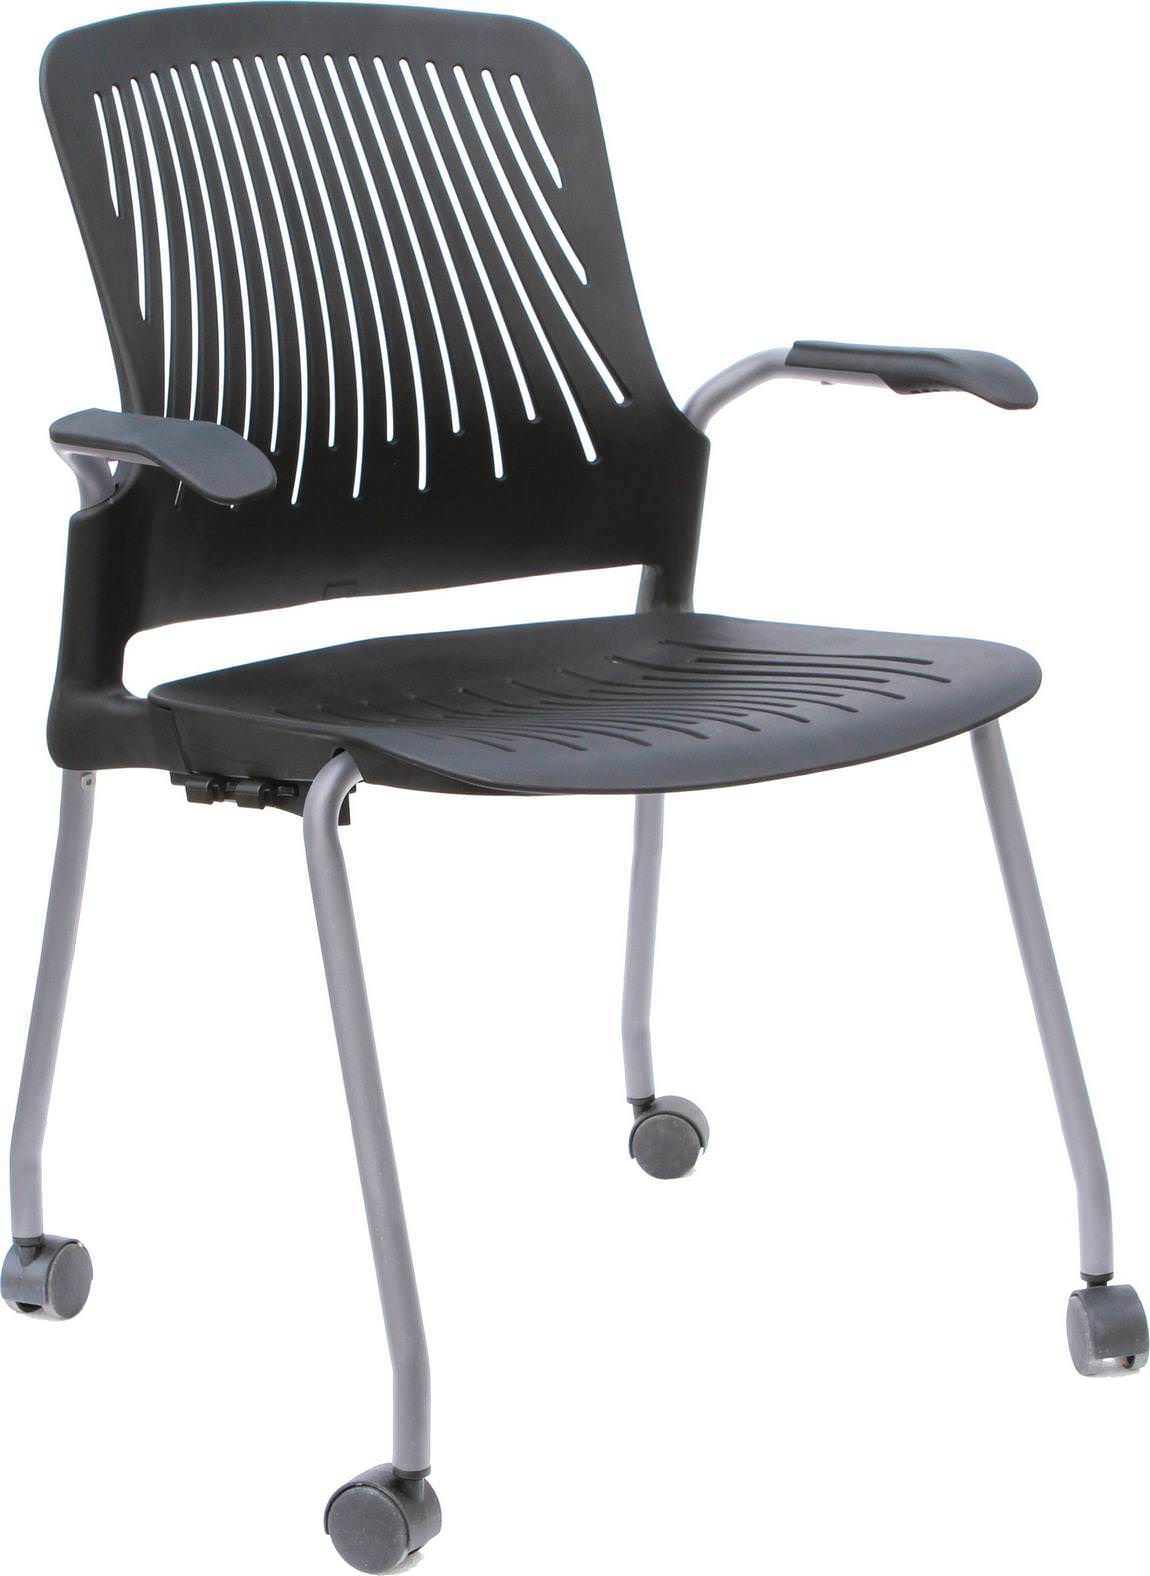 Stackable Mobile Training Chair with Arms